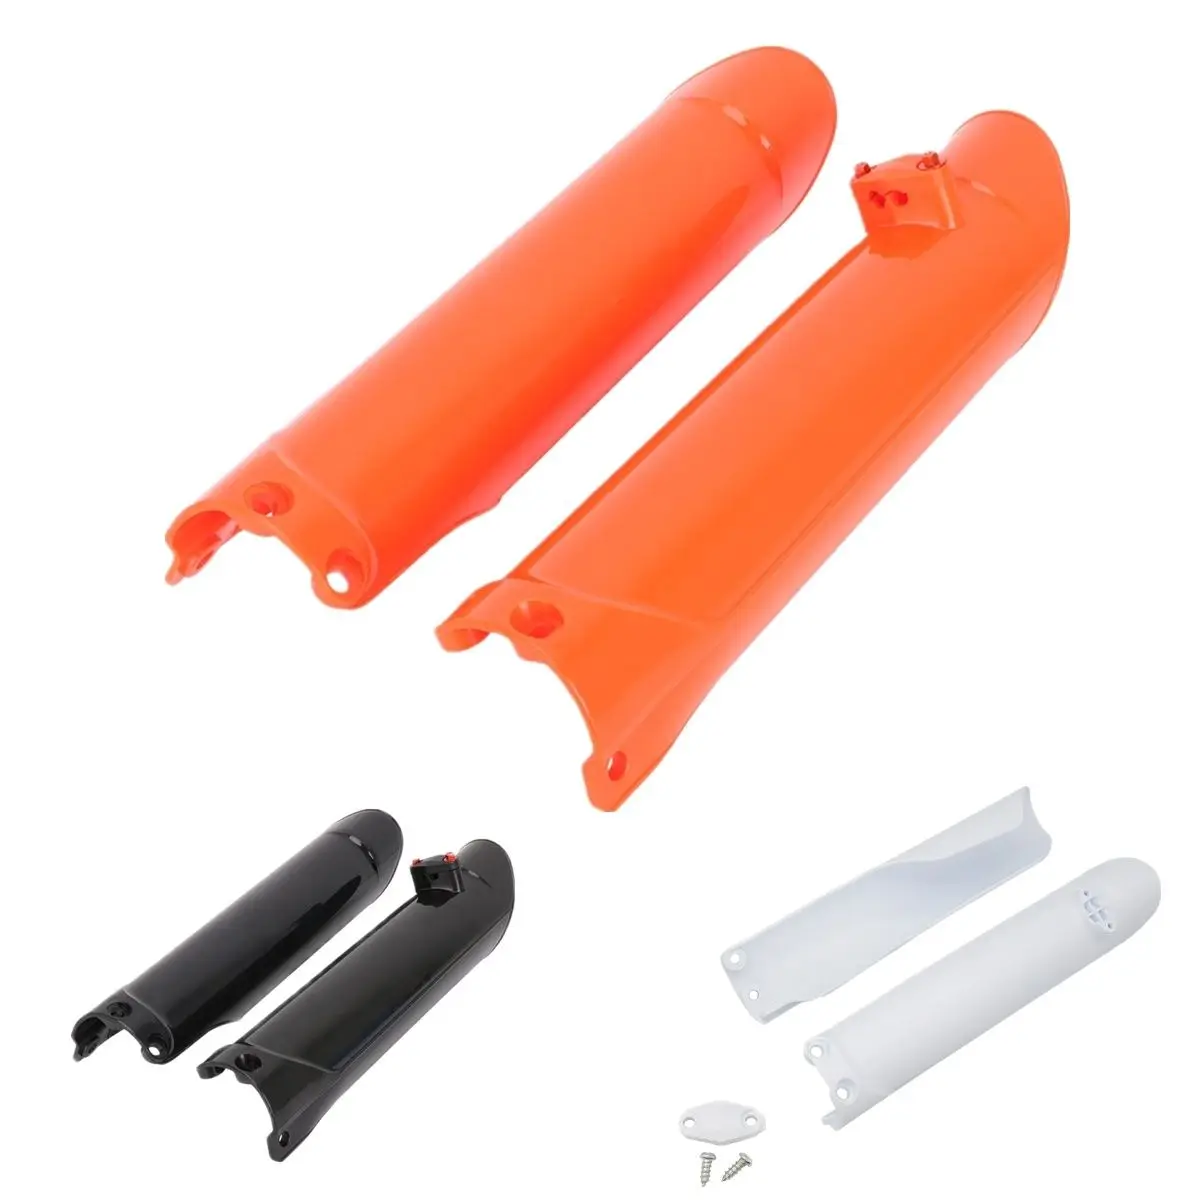 

Fork Cover Shock Absorber Guard Protector For KTM EXC EXCF SX SXF XC XCF XCW XCFW Husqvarna FC TC TE TX 125 250 300 350 450 500